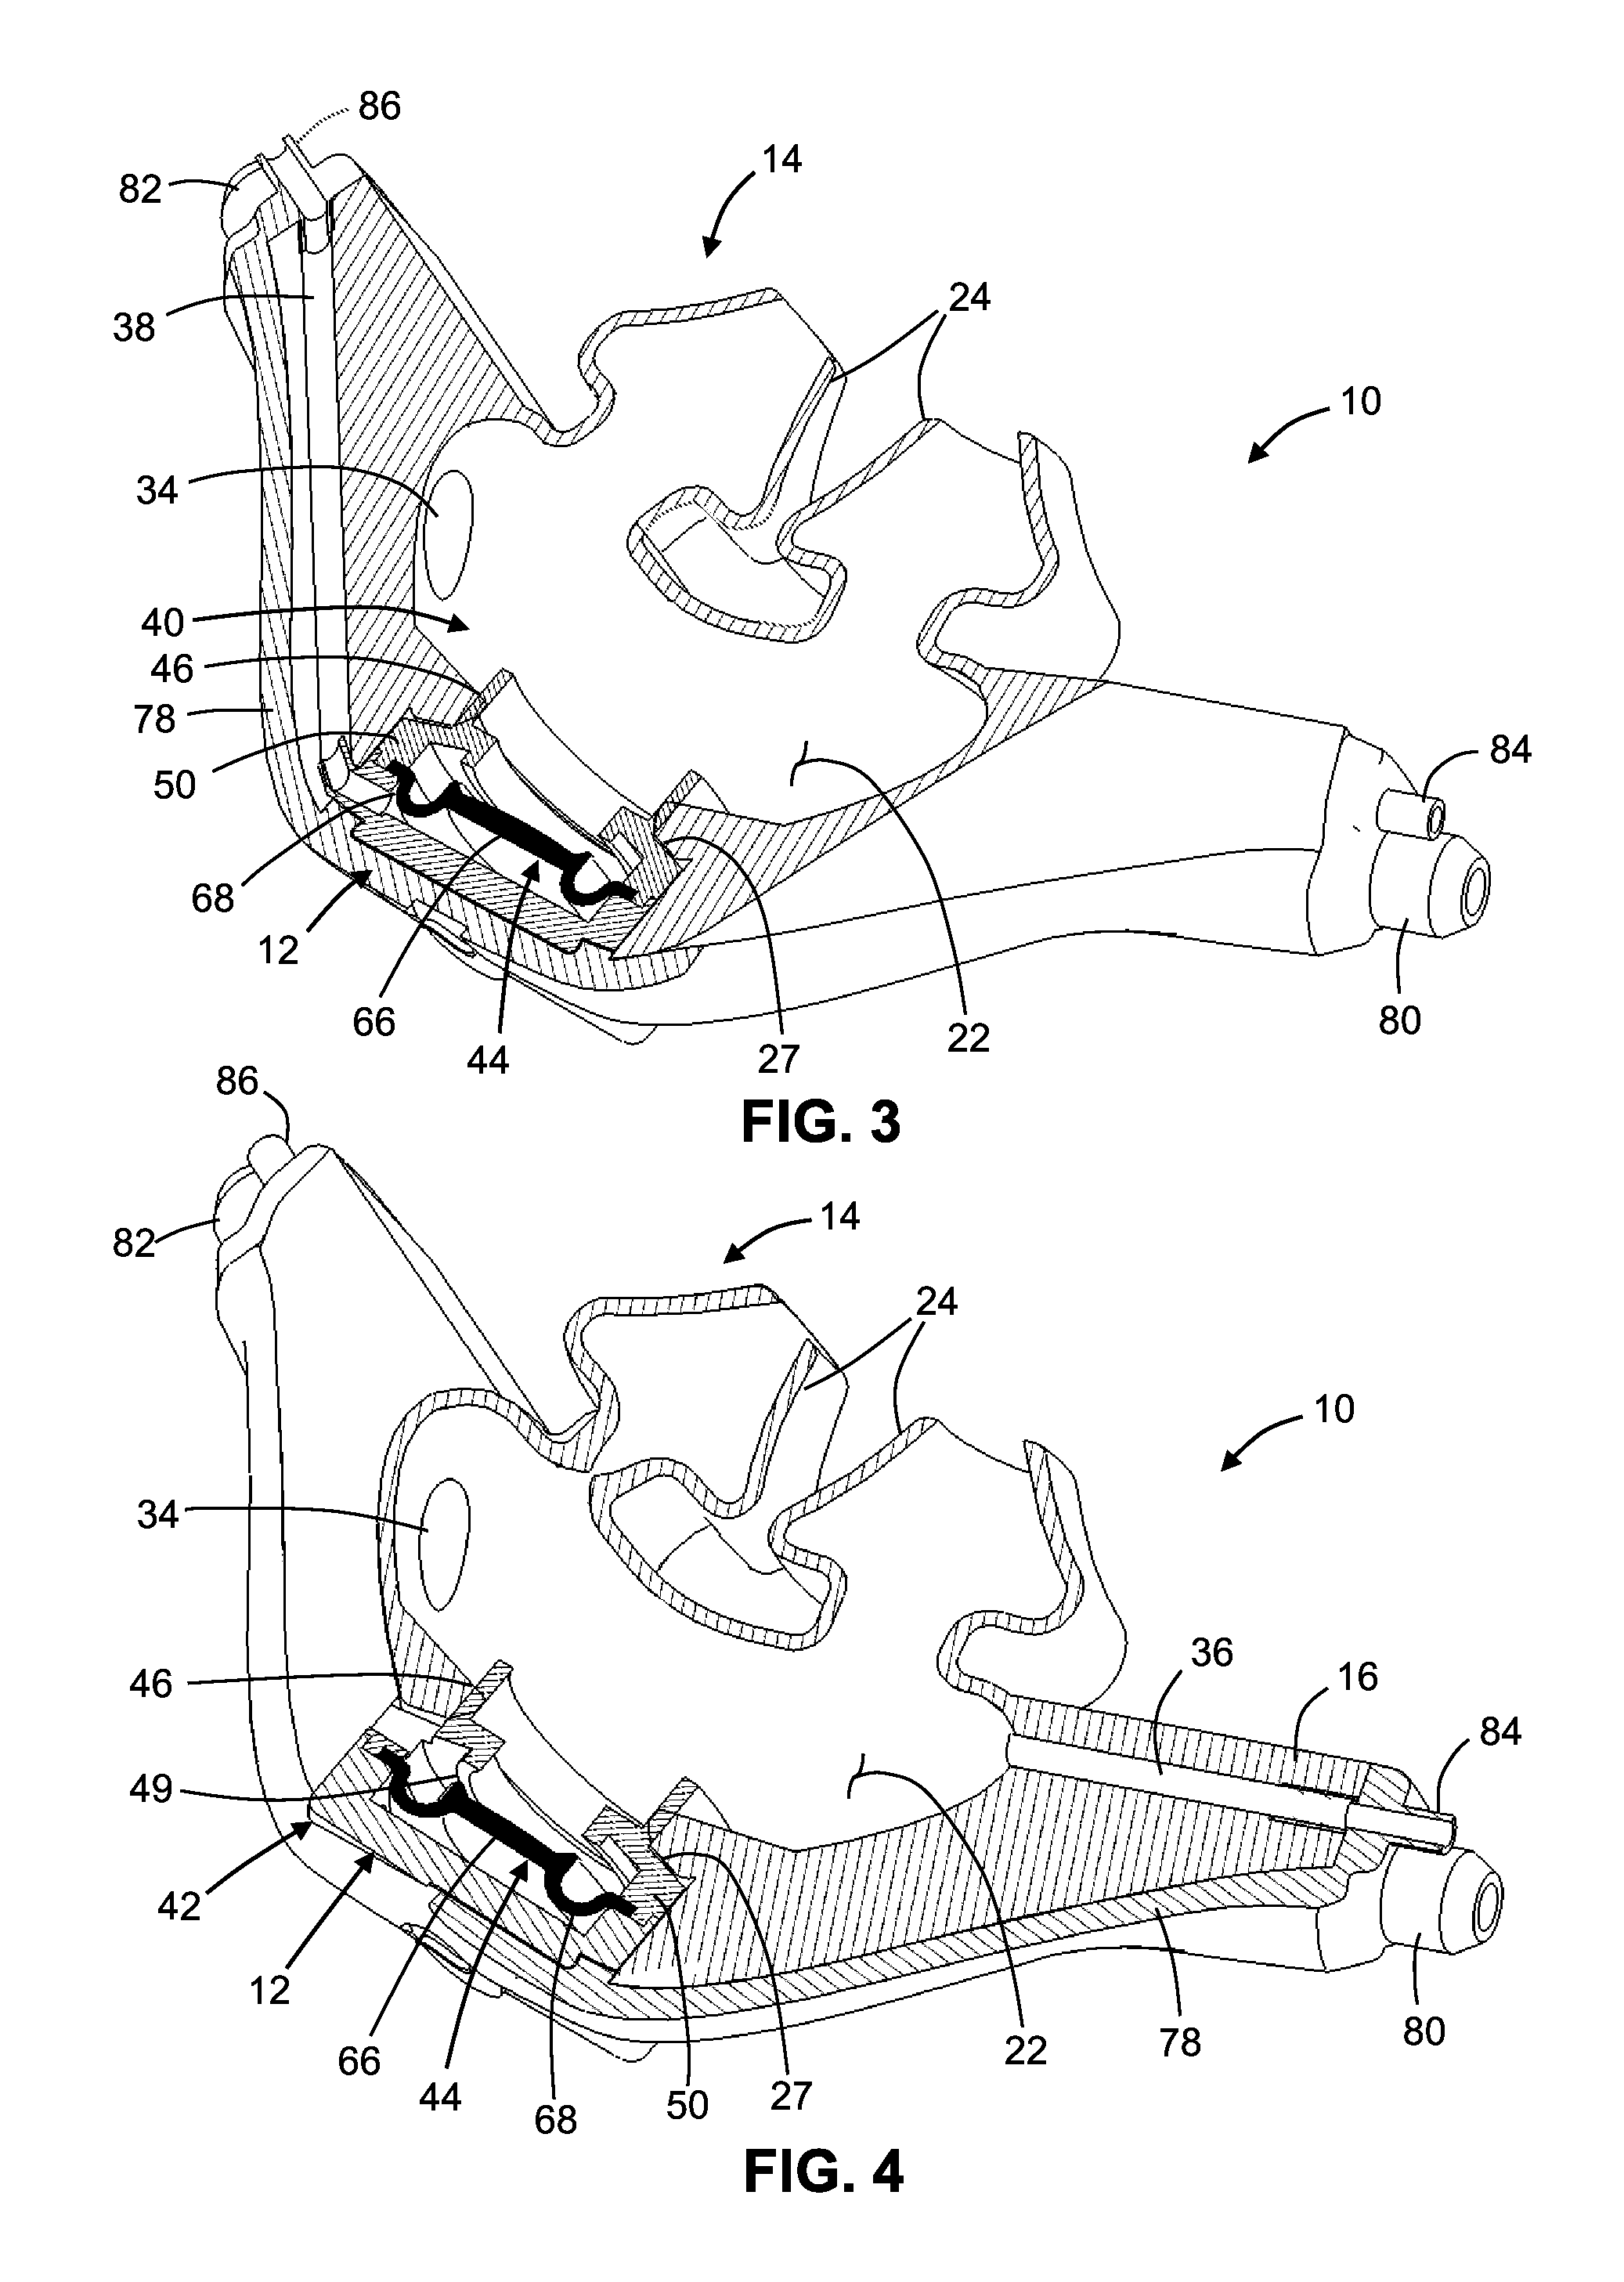 Ventilation Mask with Integrated Piloted Exhalation Valve